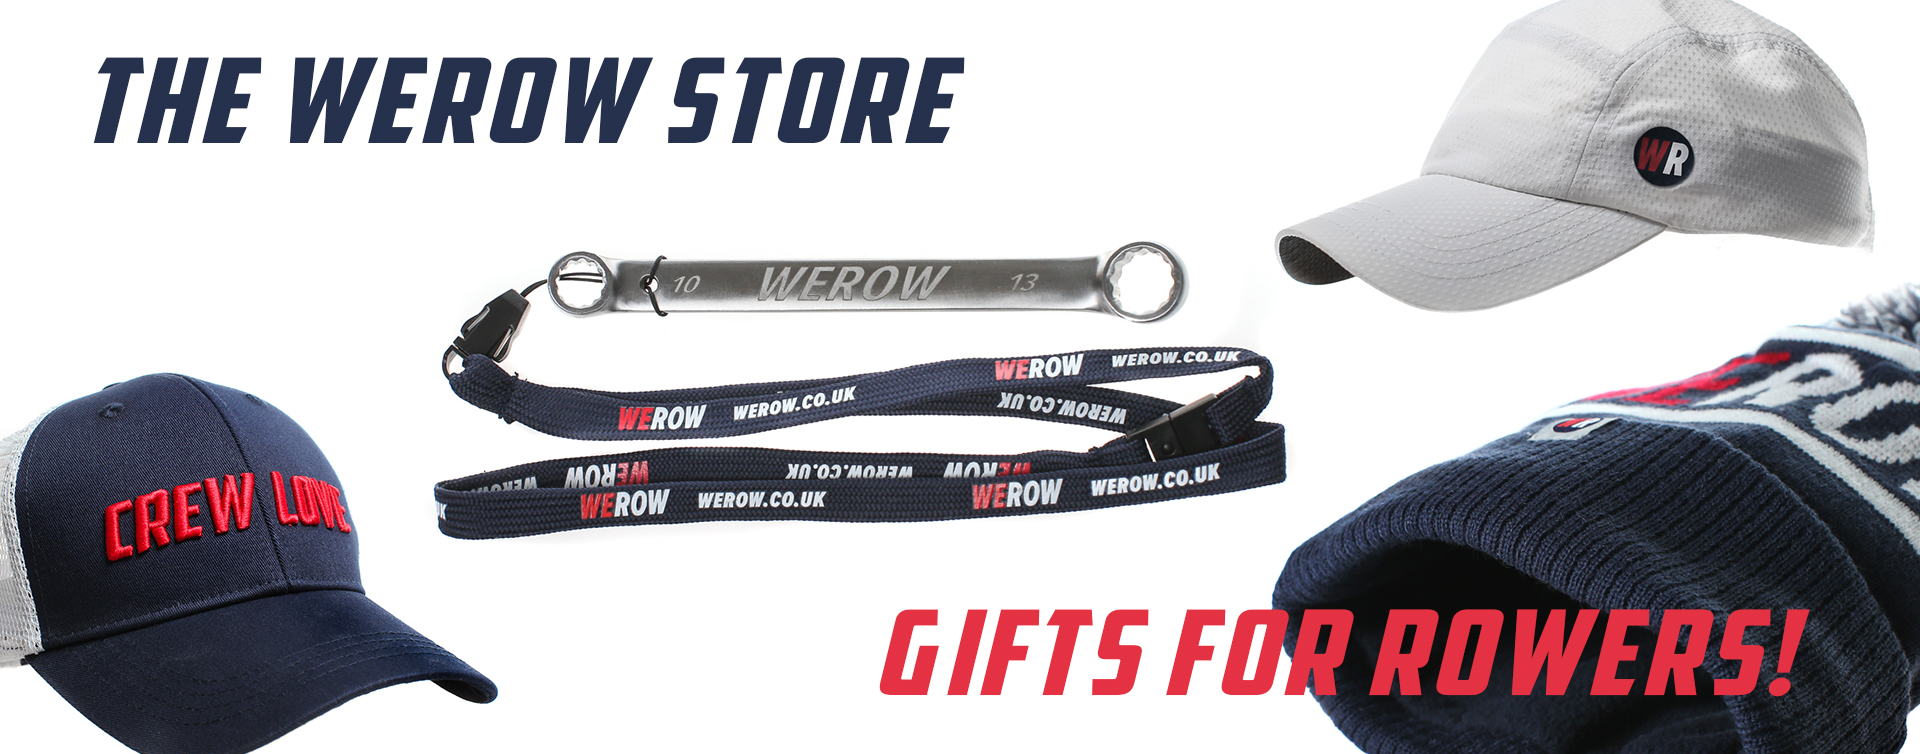 Gifts for rowers from the WEROW store - WADA List of Prohibited Substances and Methods comes into force